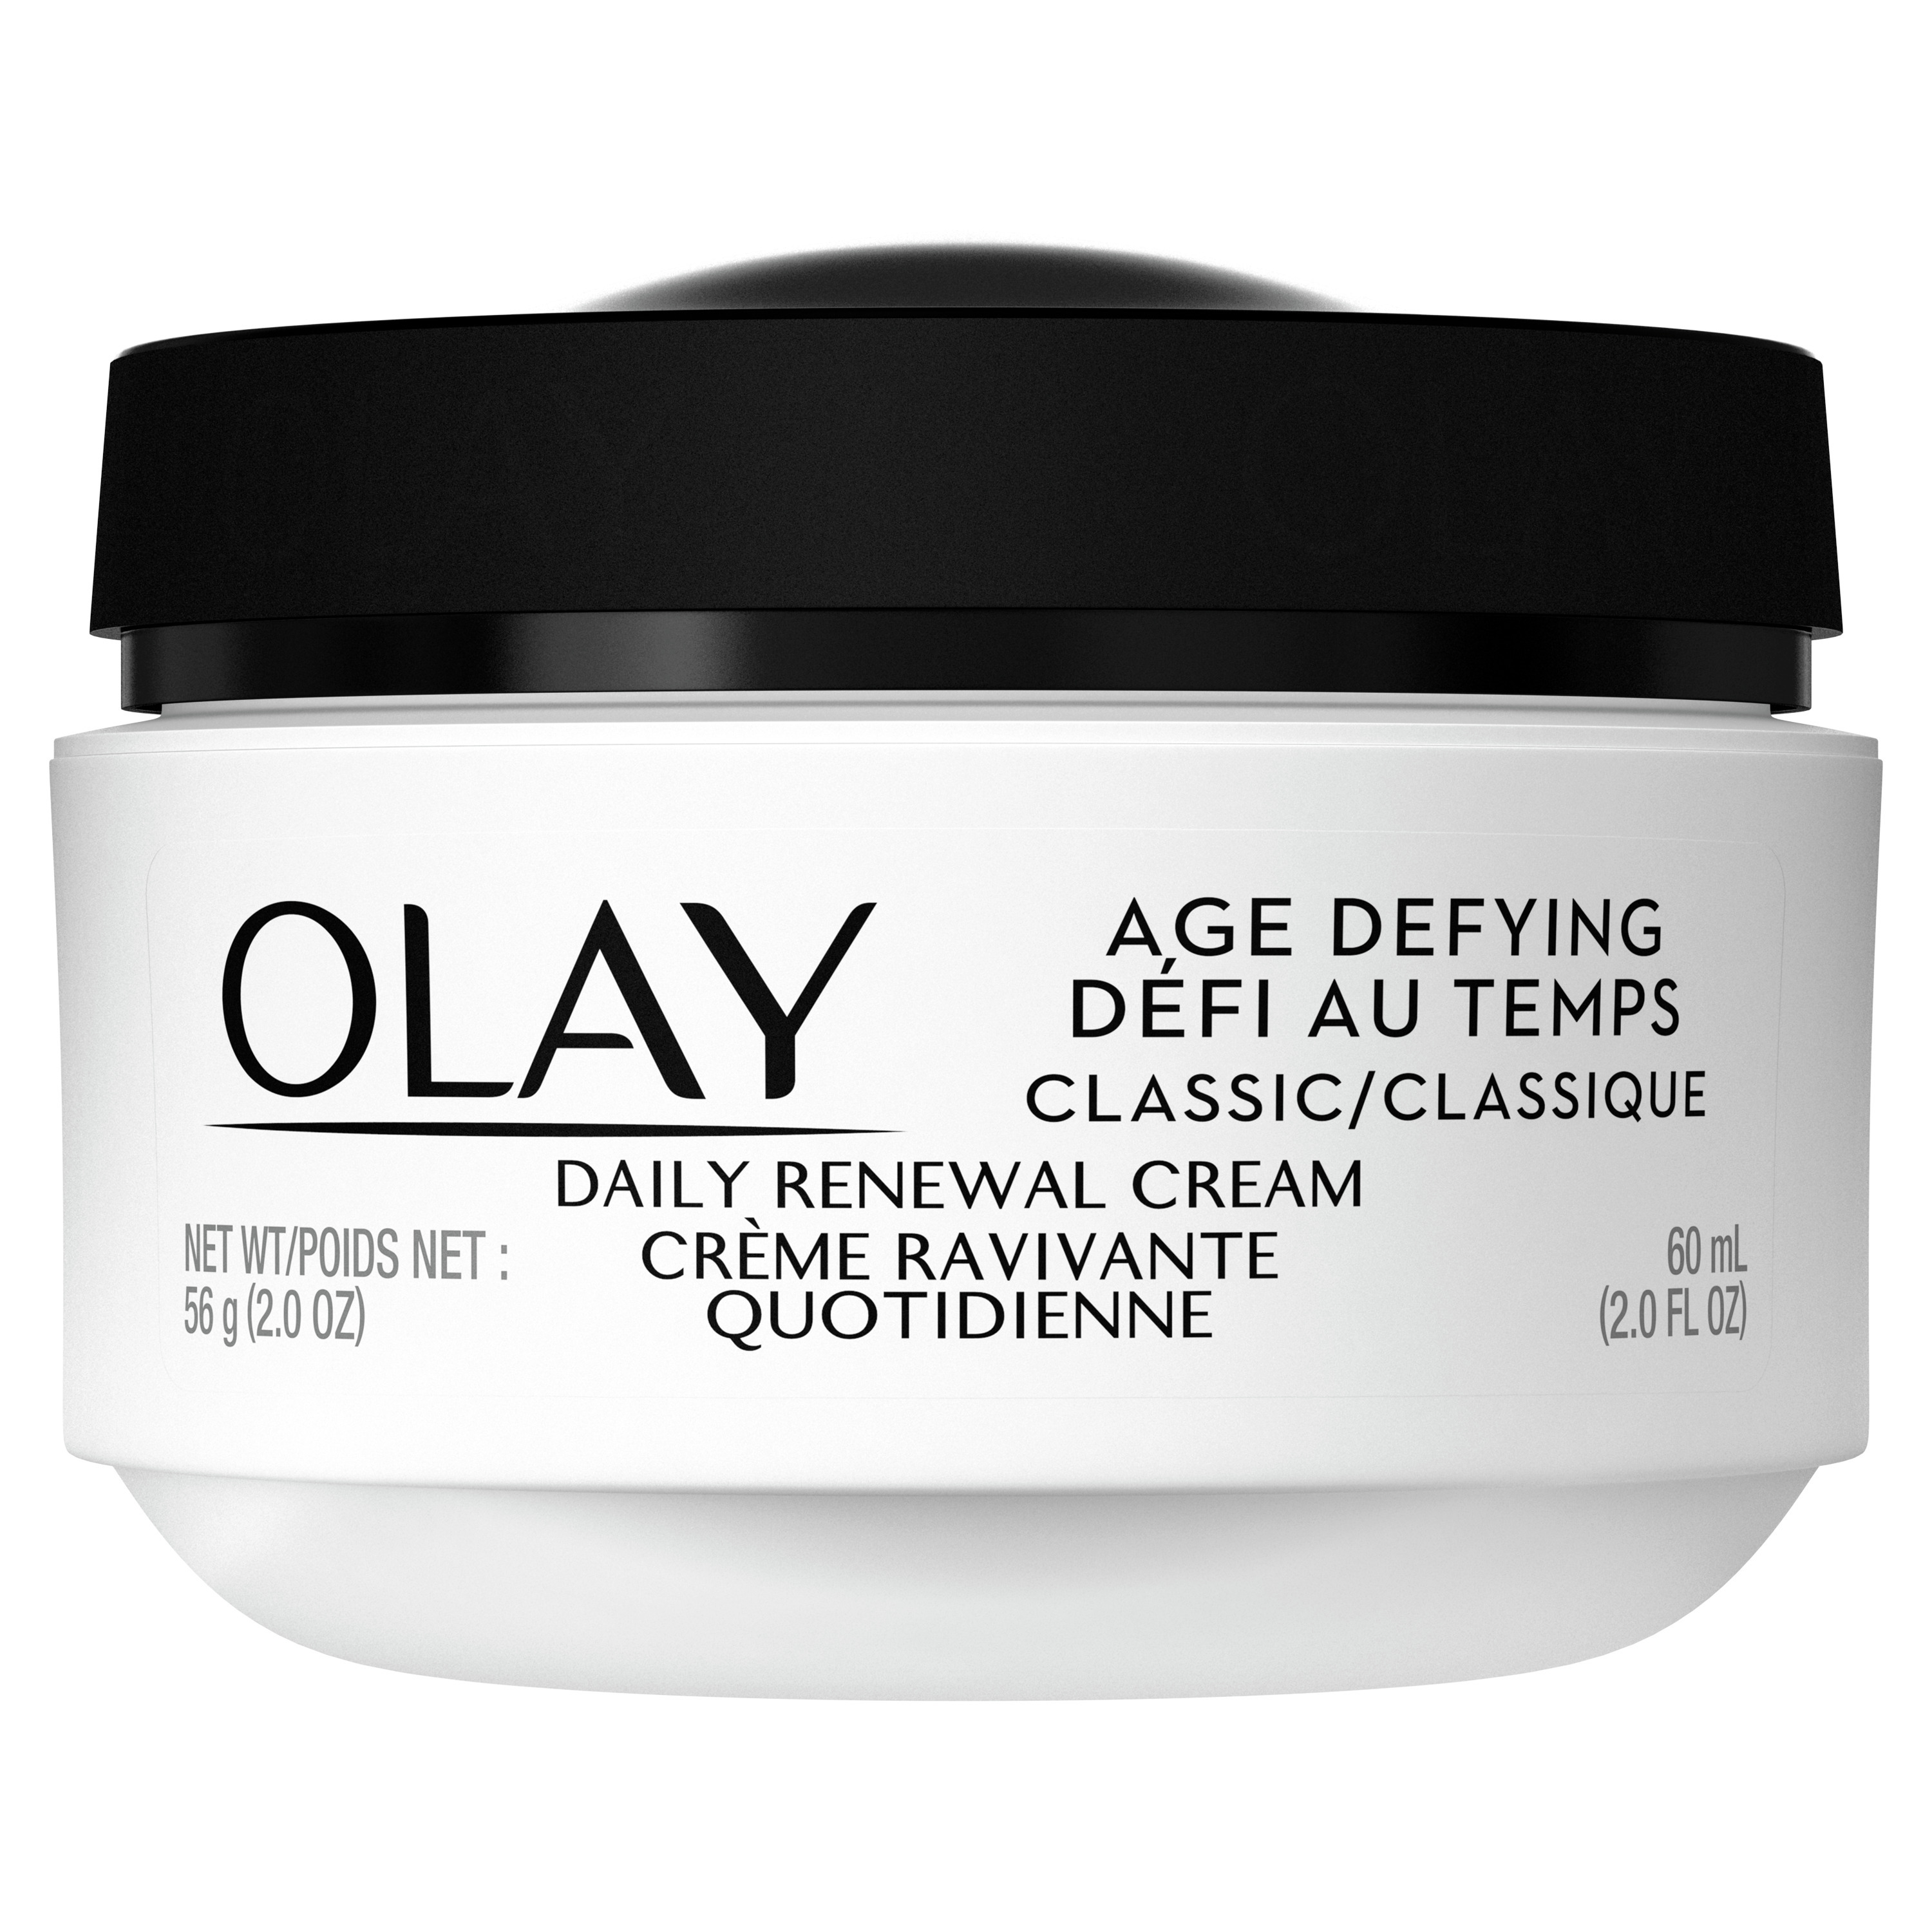 Olay Age Defying Classic Daily Renewal Cream, Face Moisturizer for Dull Combination Skin, 2.0 fl oz - image 2 of 10